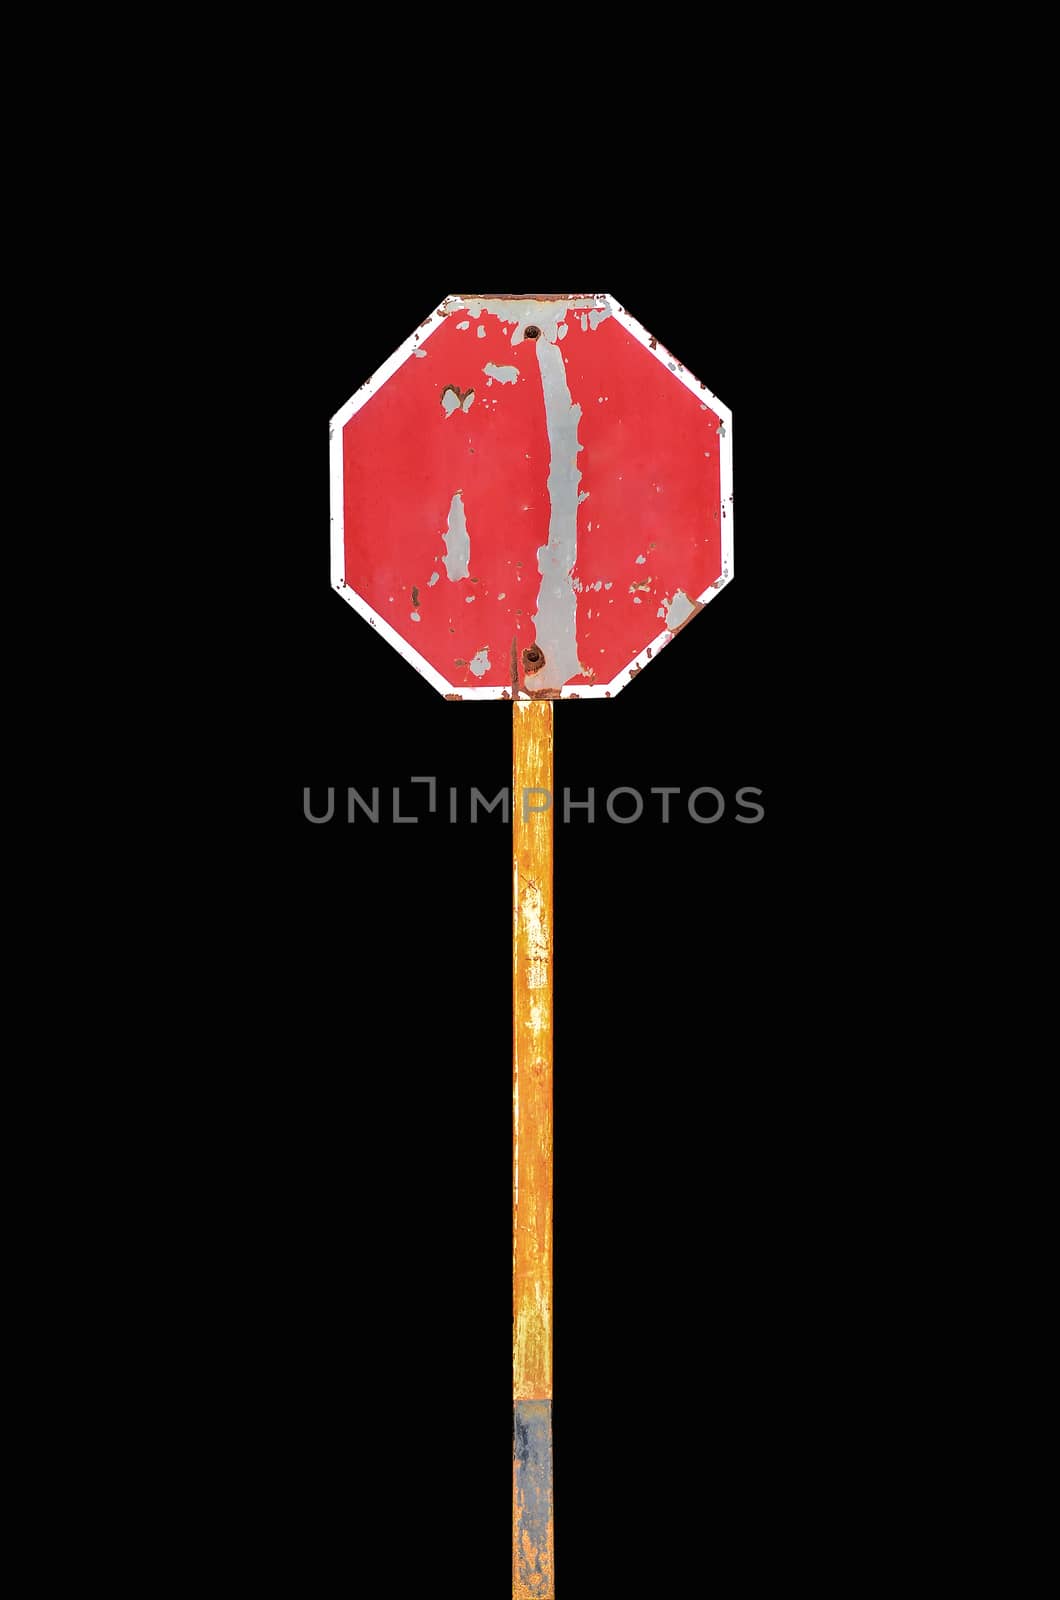 Old Traffic Signs on black background